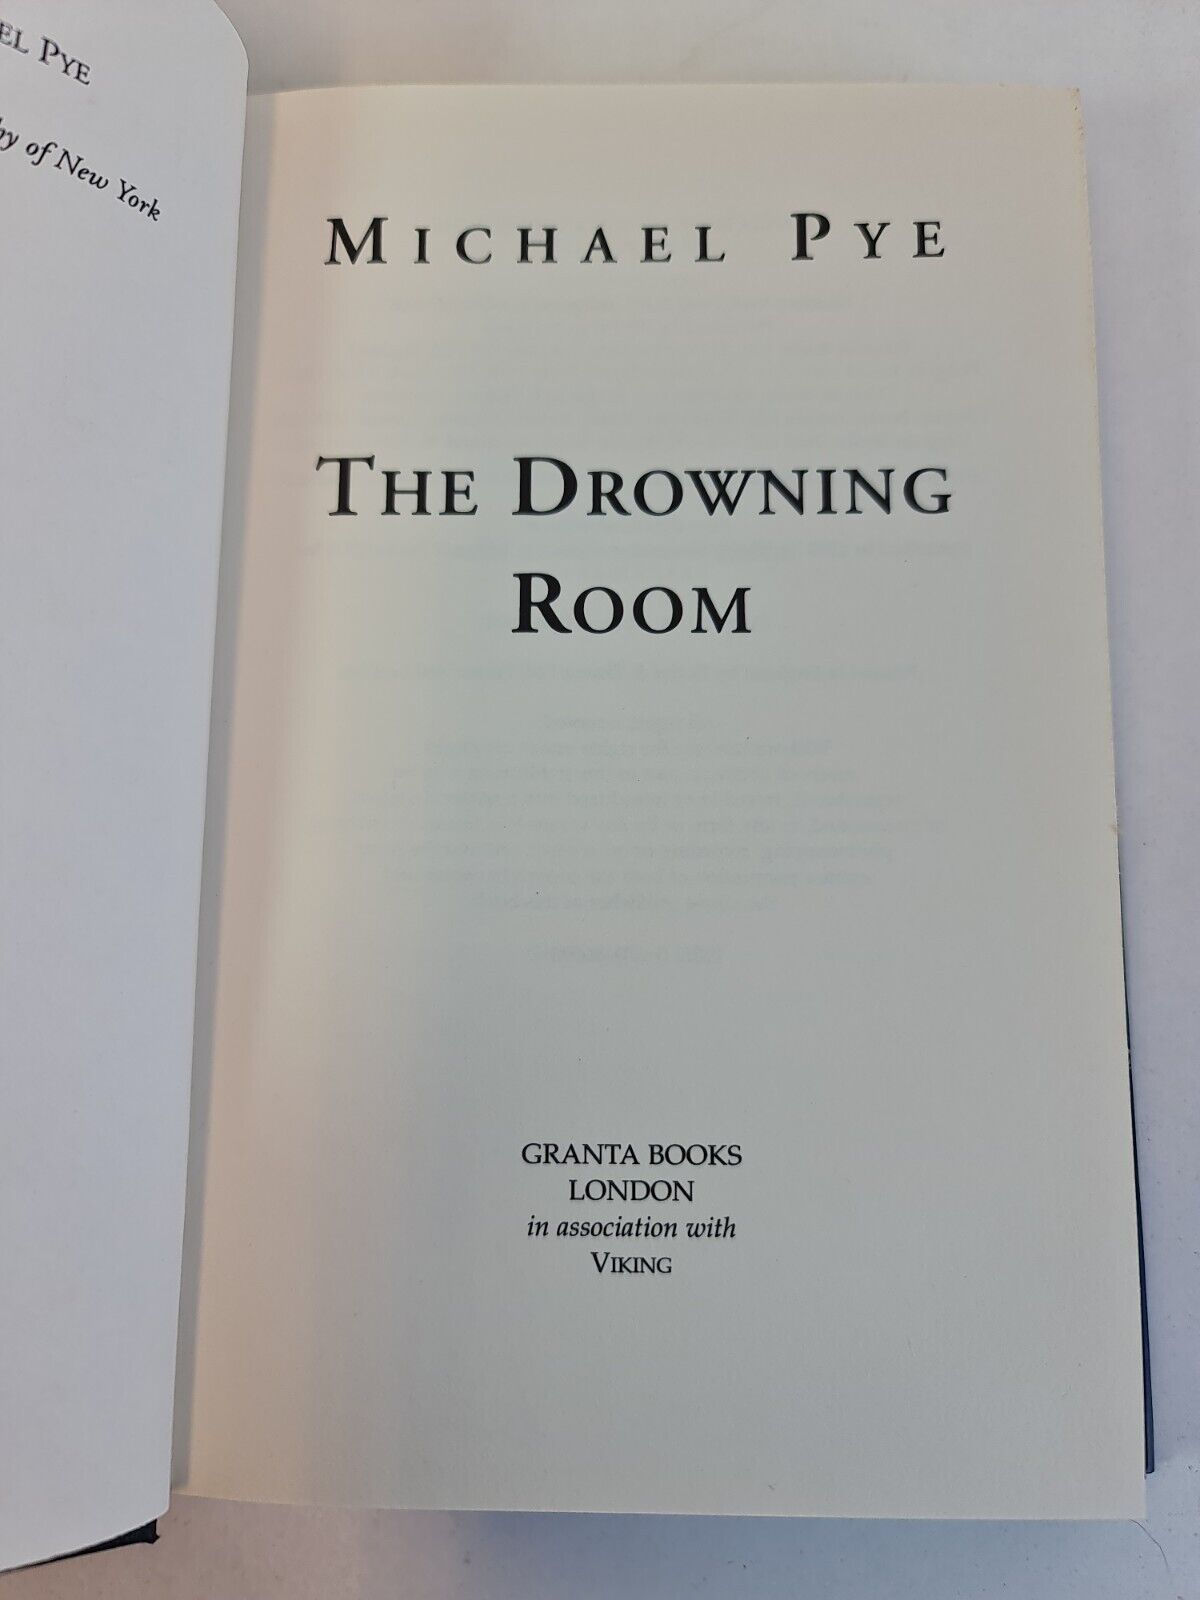 The Drowning Room by Michael Pye (1995)